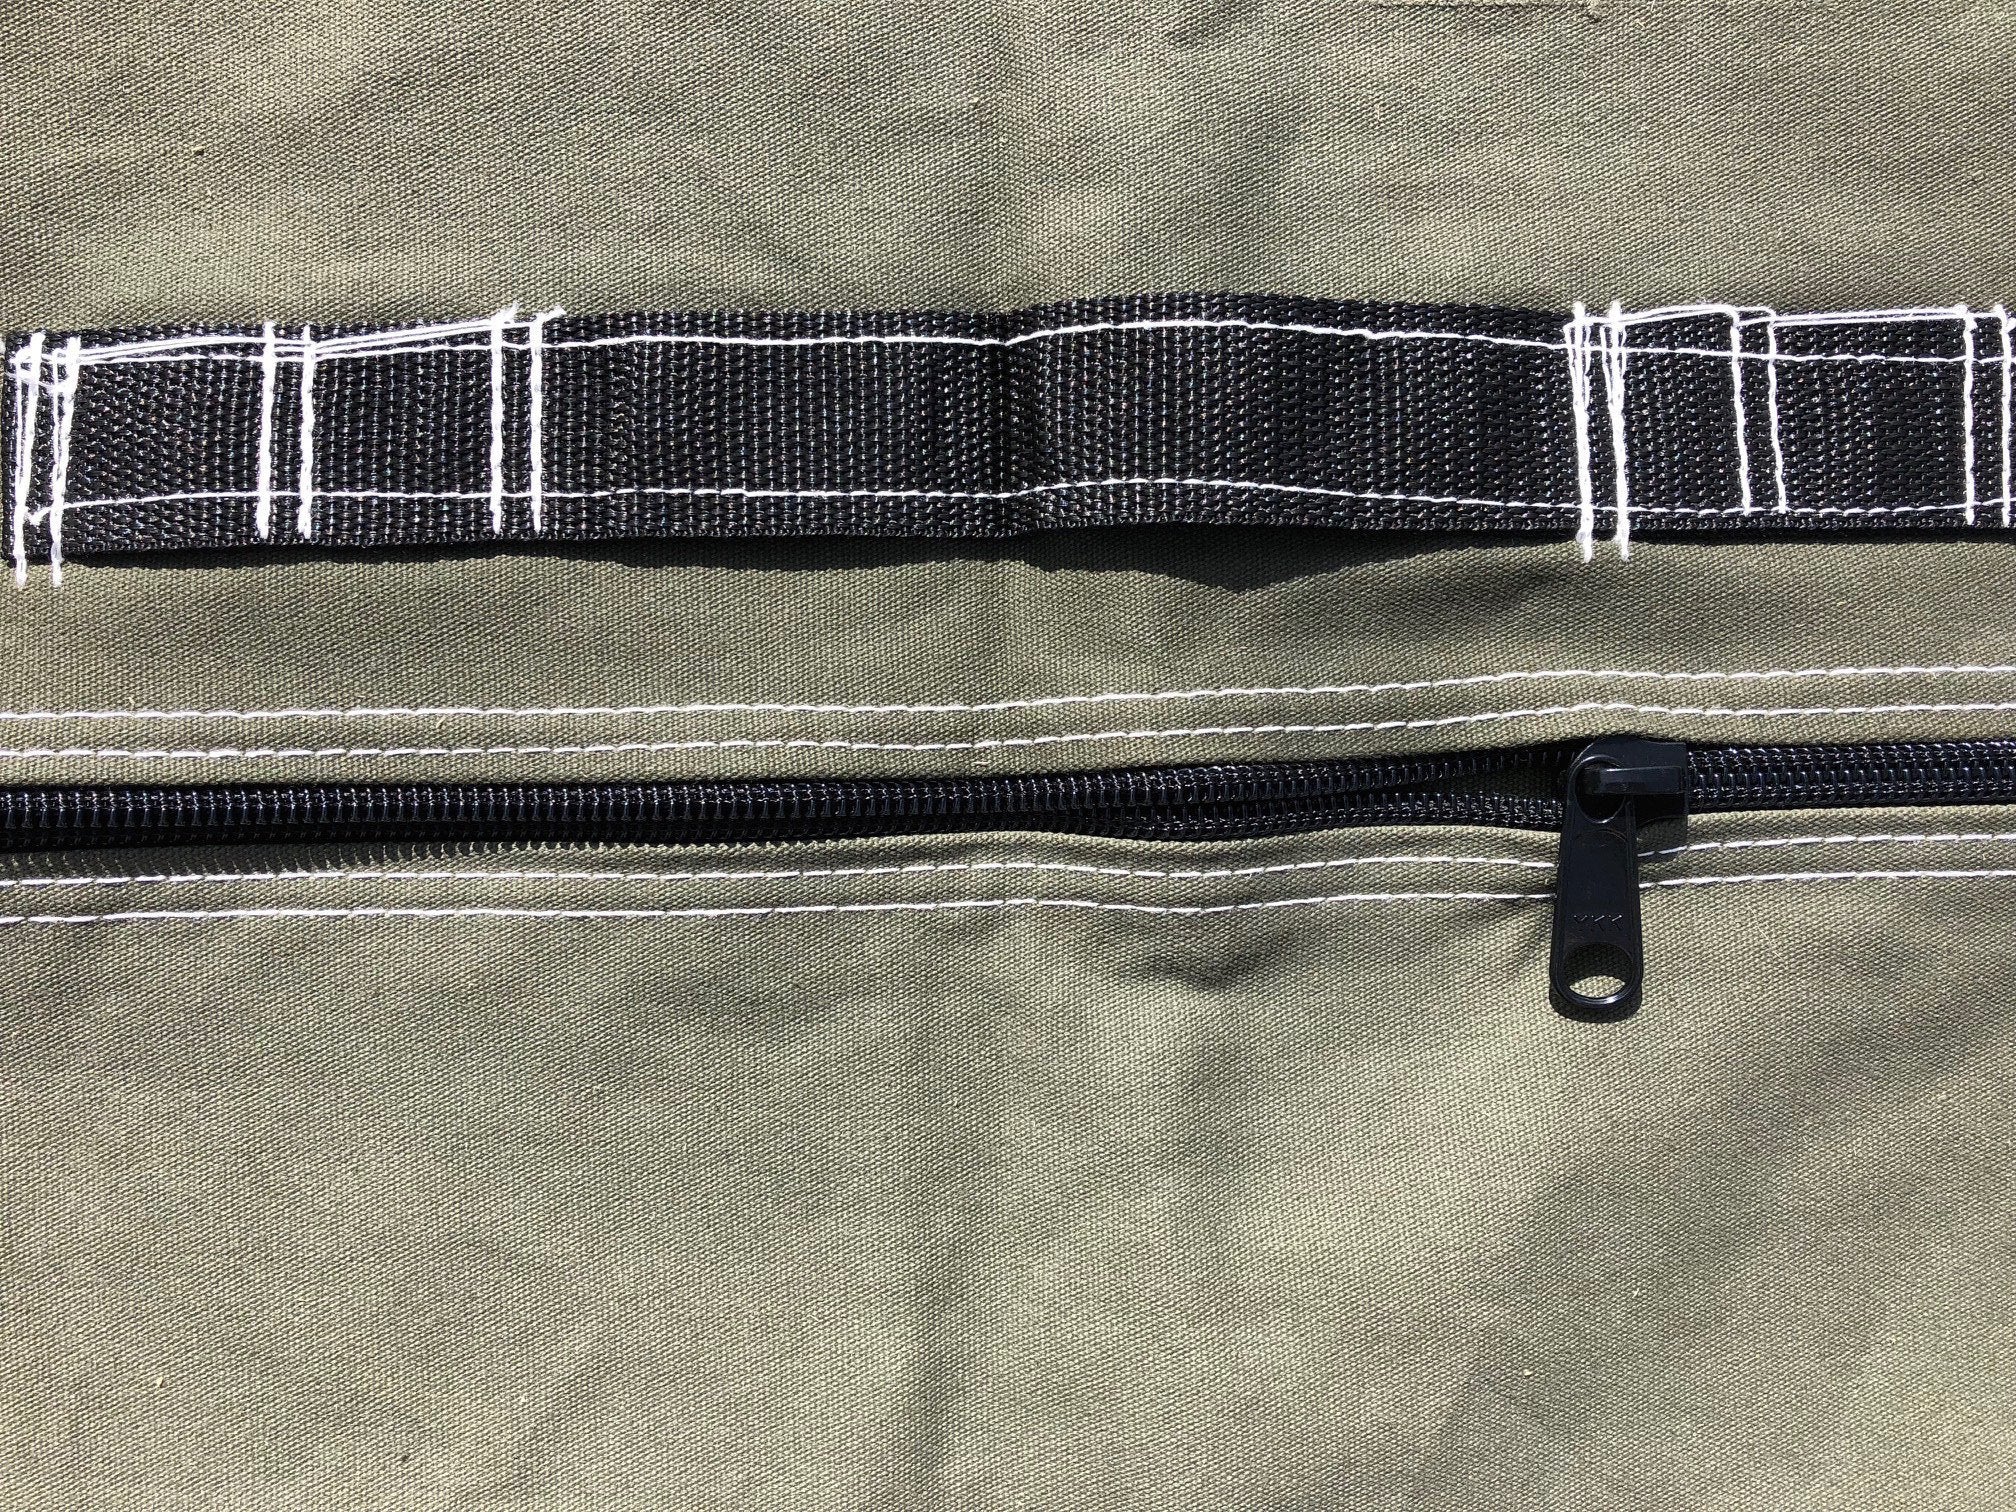 Frame bag showing one handle and zipper.